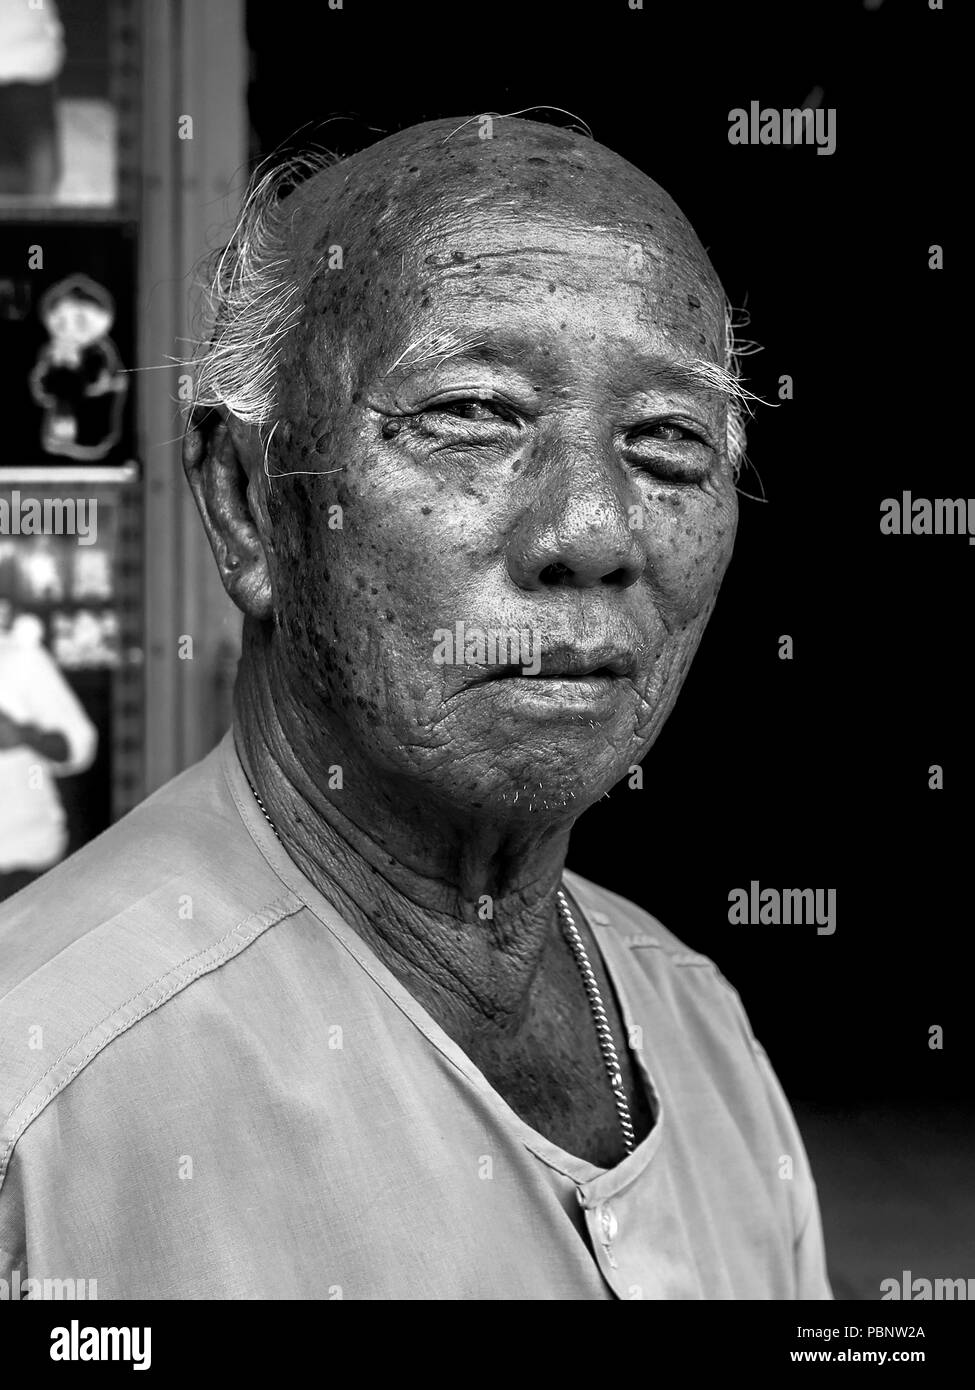 Black and white portrait of an elderly Asian man, Black and white photography Stock Photo